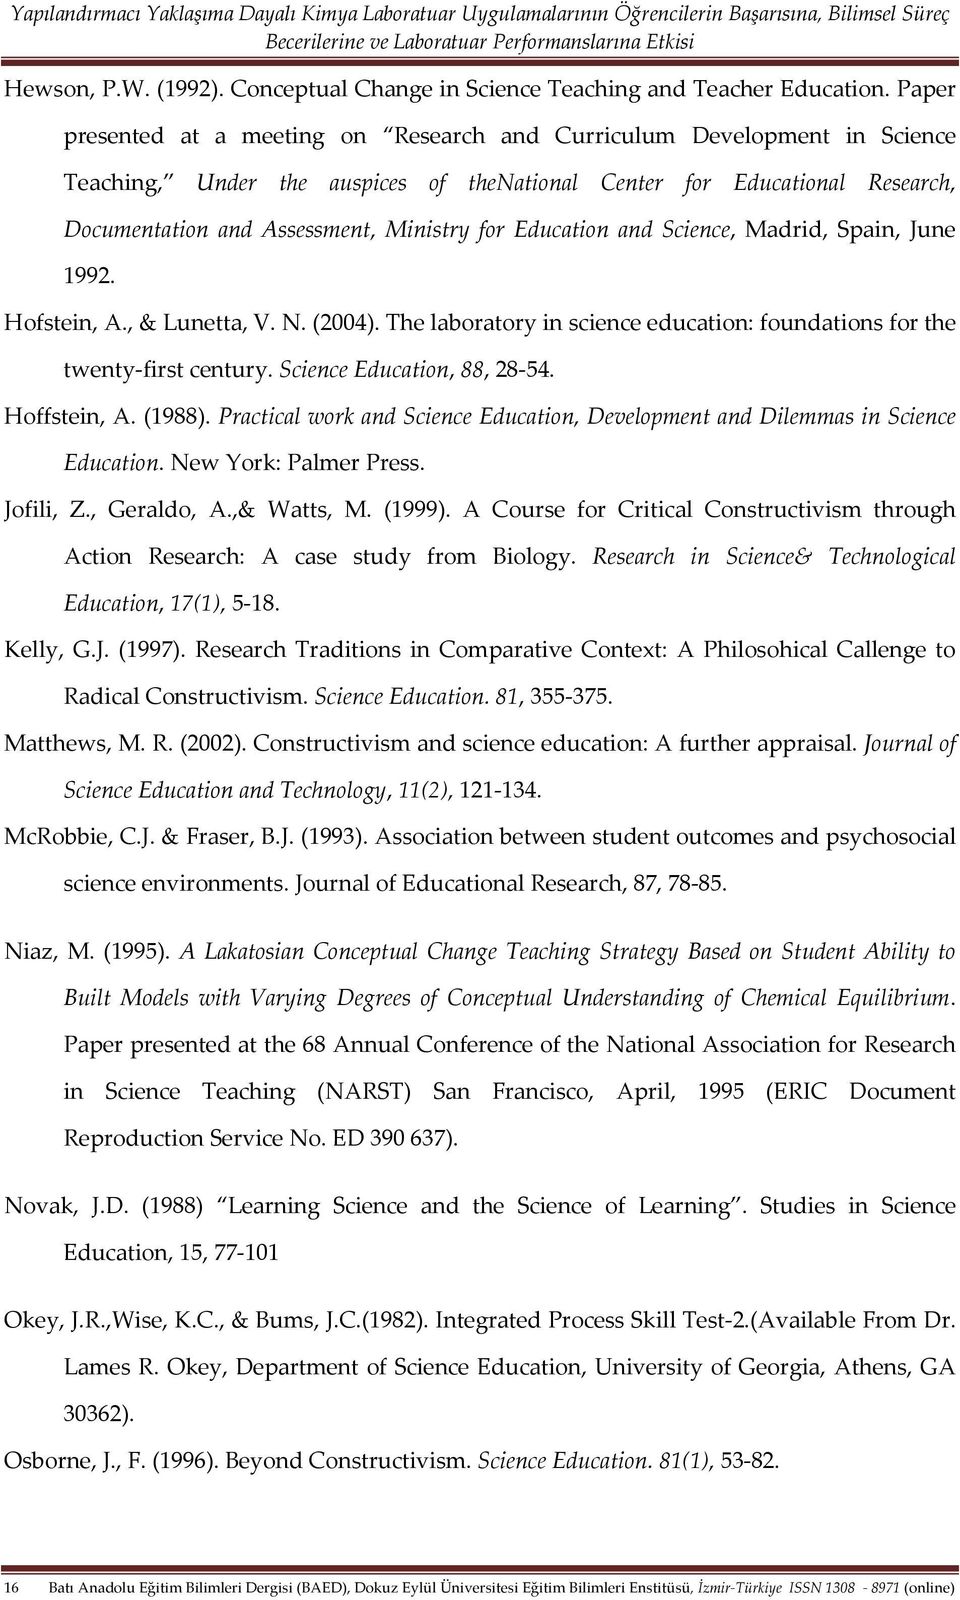 Education and Science, Madrid, Spain, June 1992. Hofstein, A., & Lunetta, V. N. (2004). The laboratory in science education: foundations for the twenty-first century. Science Education, 88, 28-54.